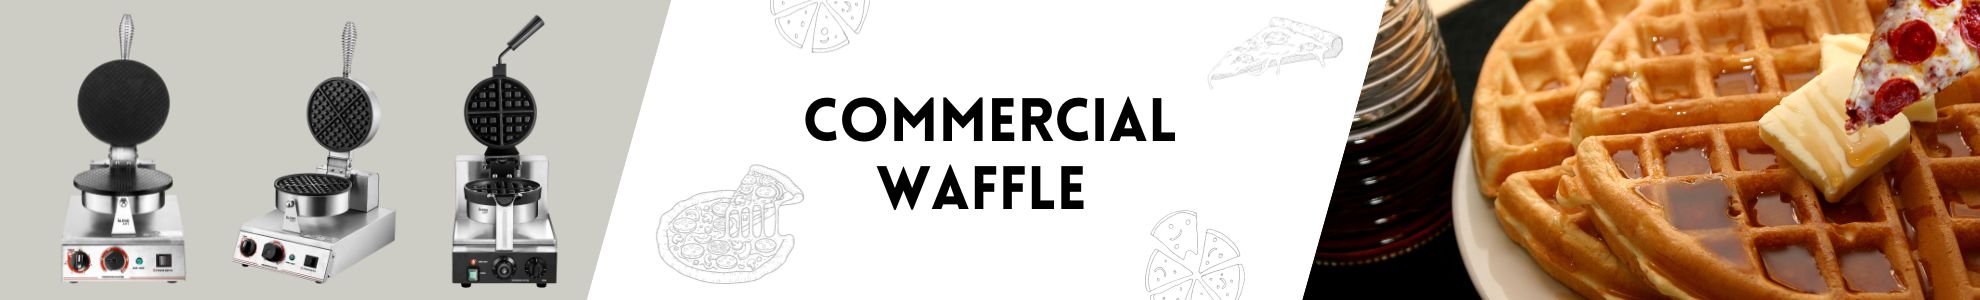 commercial waffle